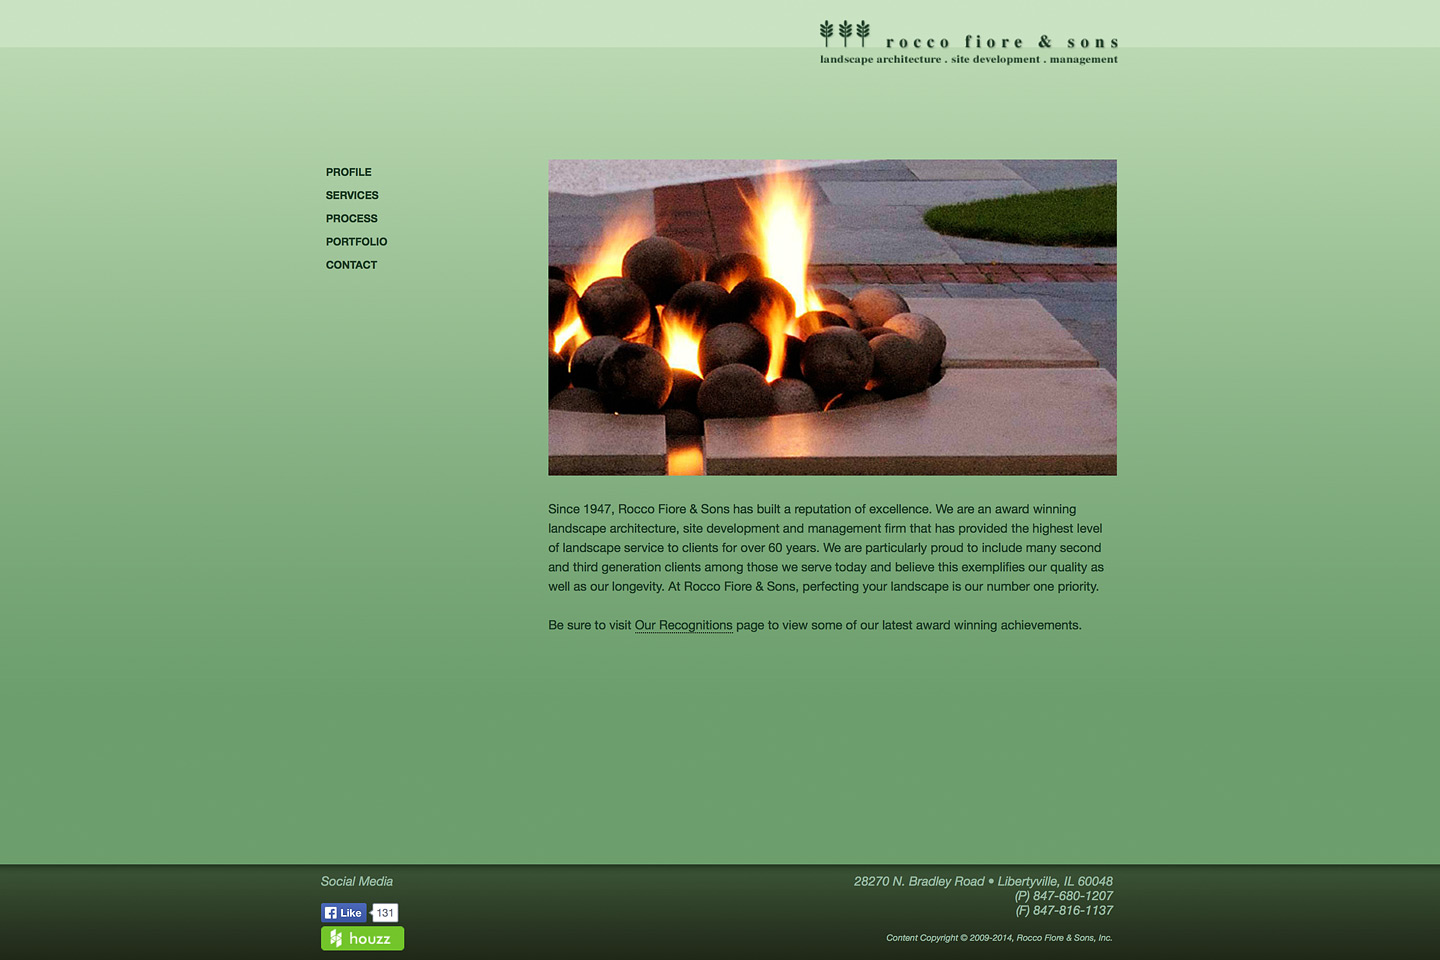 a screen capture of the rocco fiore & sons homepage designed by 4d, inc, featuring a custom designed fire pit